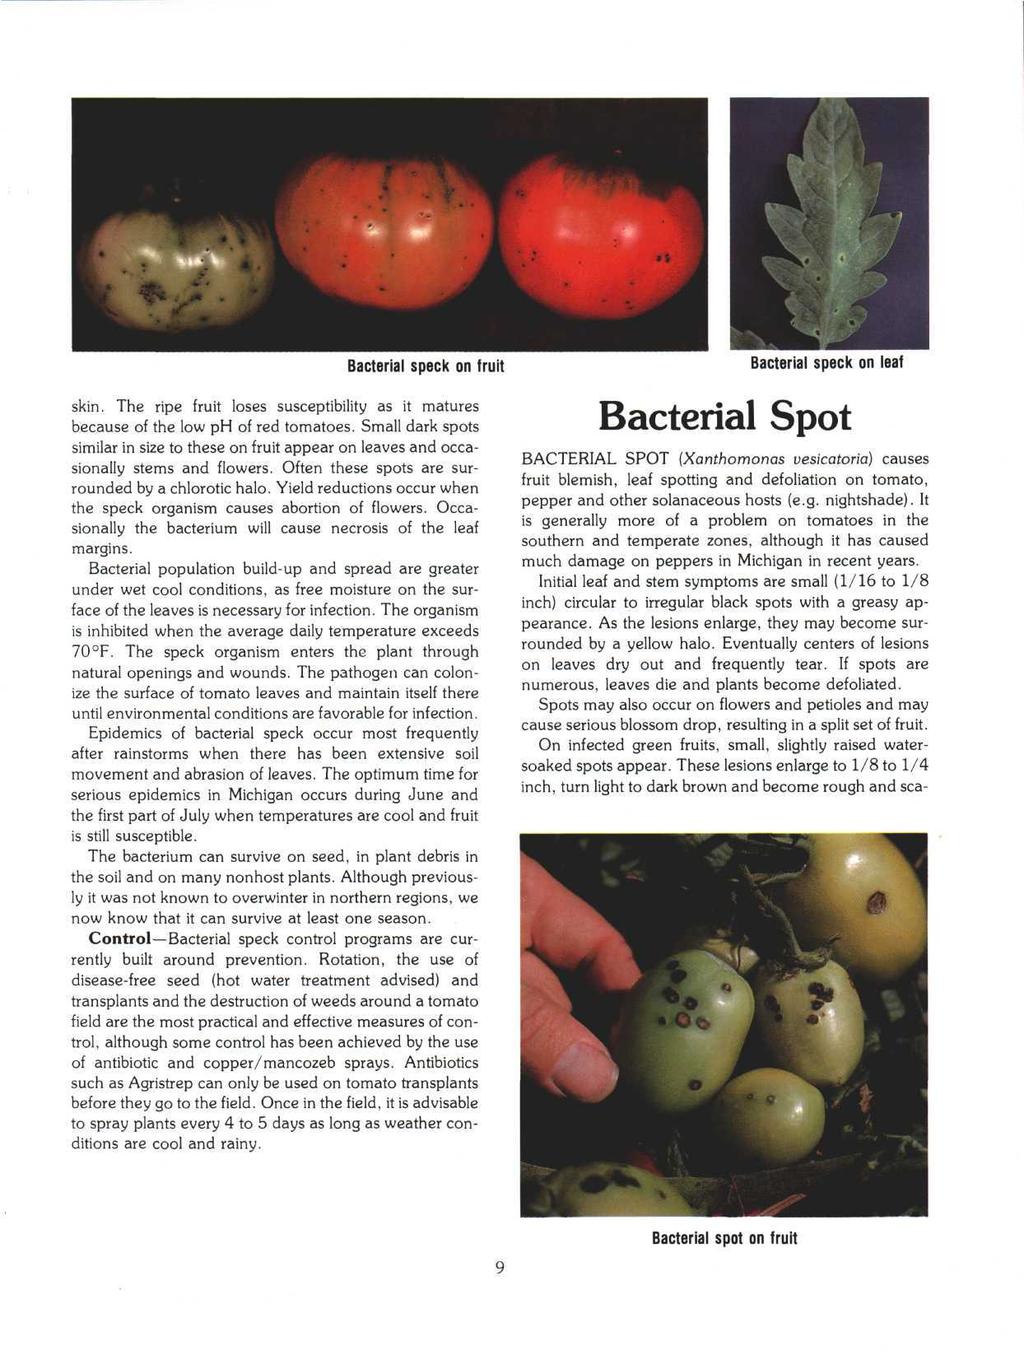 Bacterial speck on fruit skin. The ripe fruit loses susceptibility as it matures because of the low ph of red tomatoes.